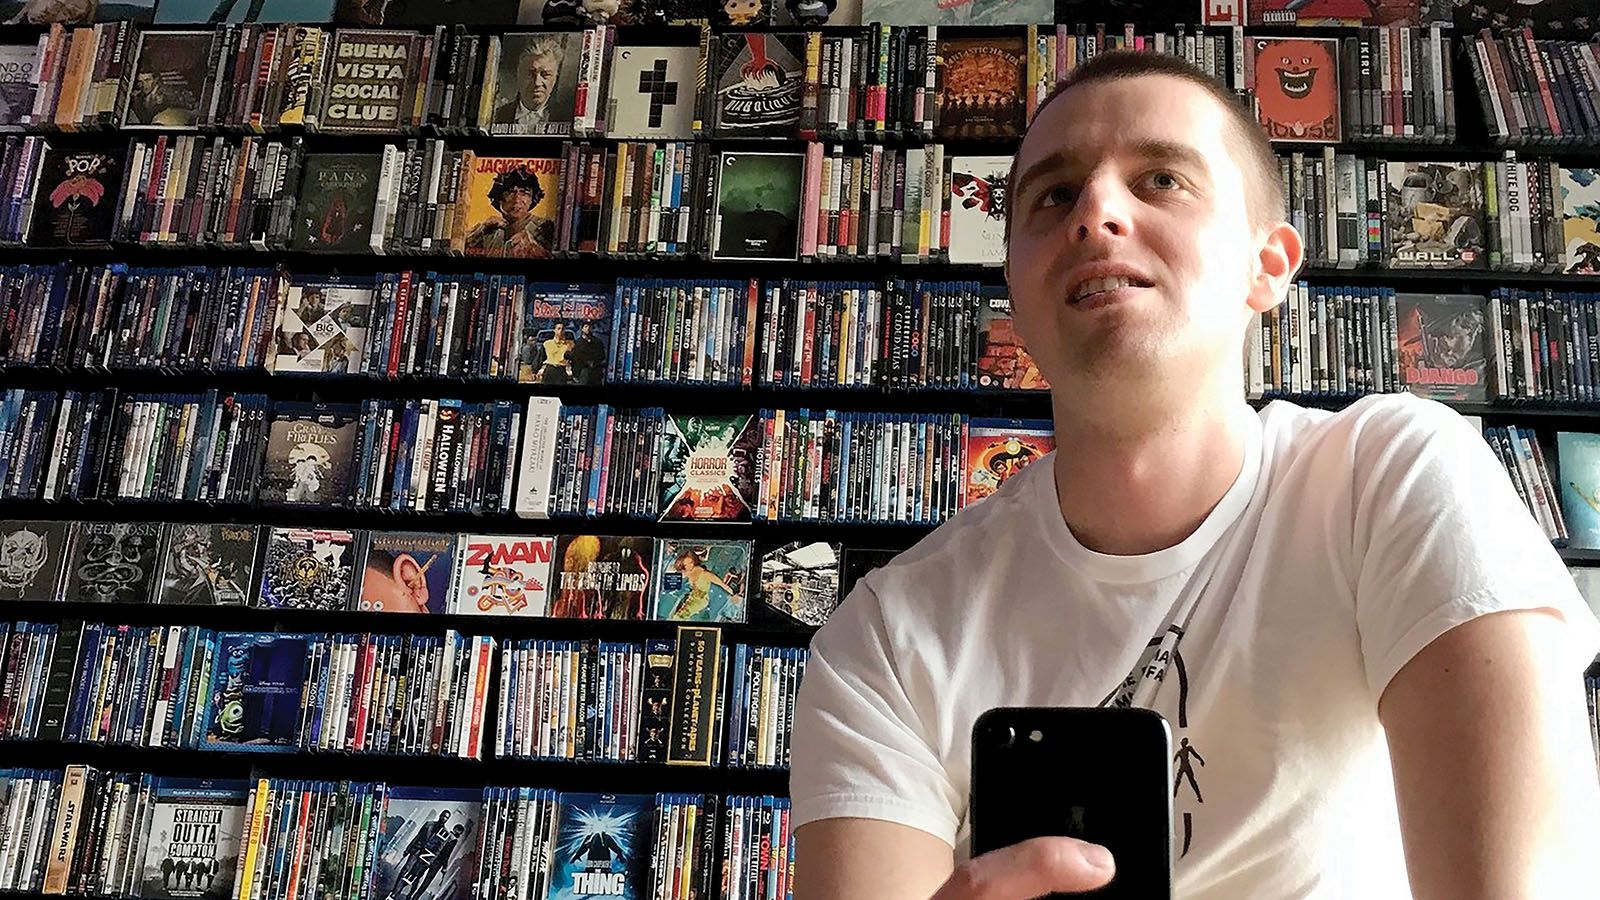 Cinephile Collin McCallister sports an impressive collection of about 1,500 albums and 1,500 movies.